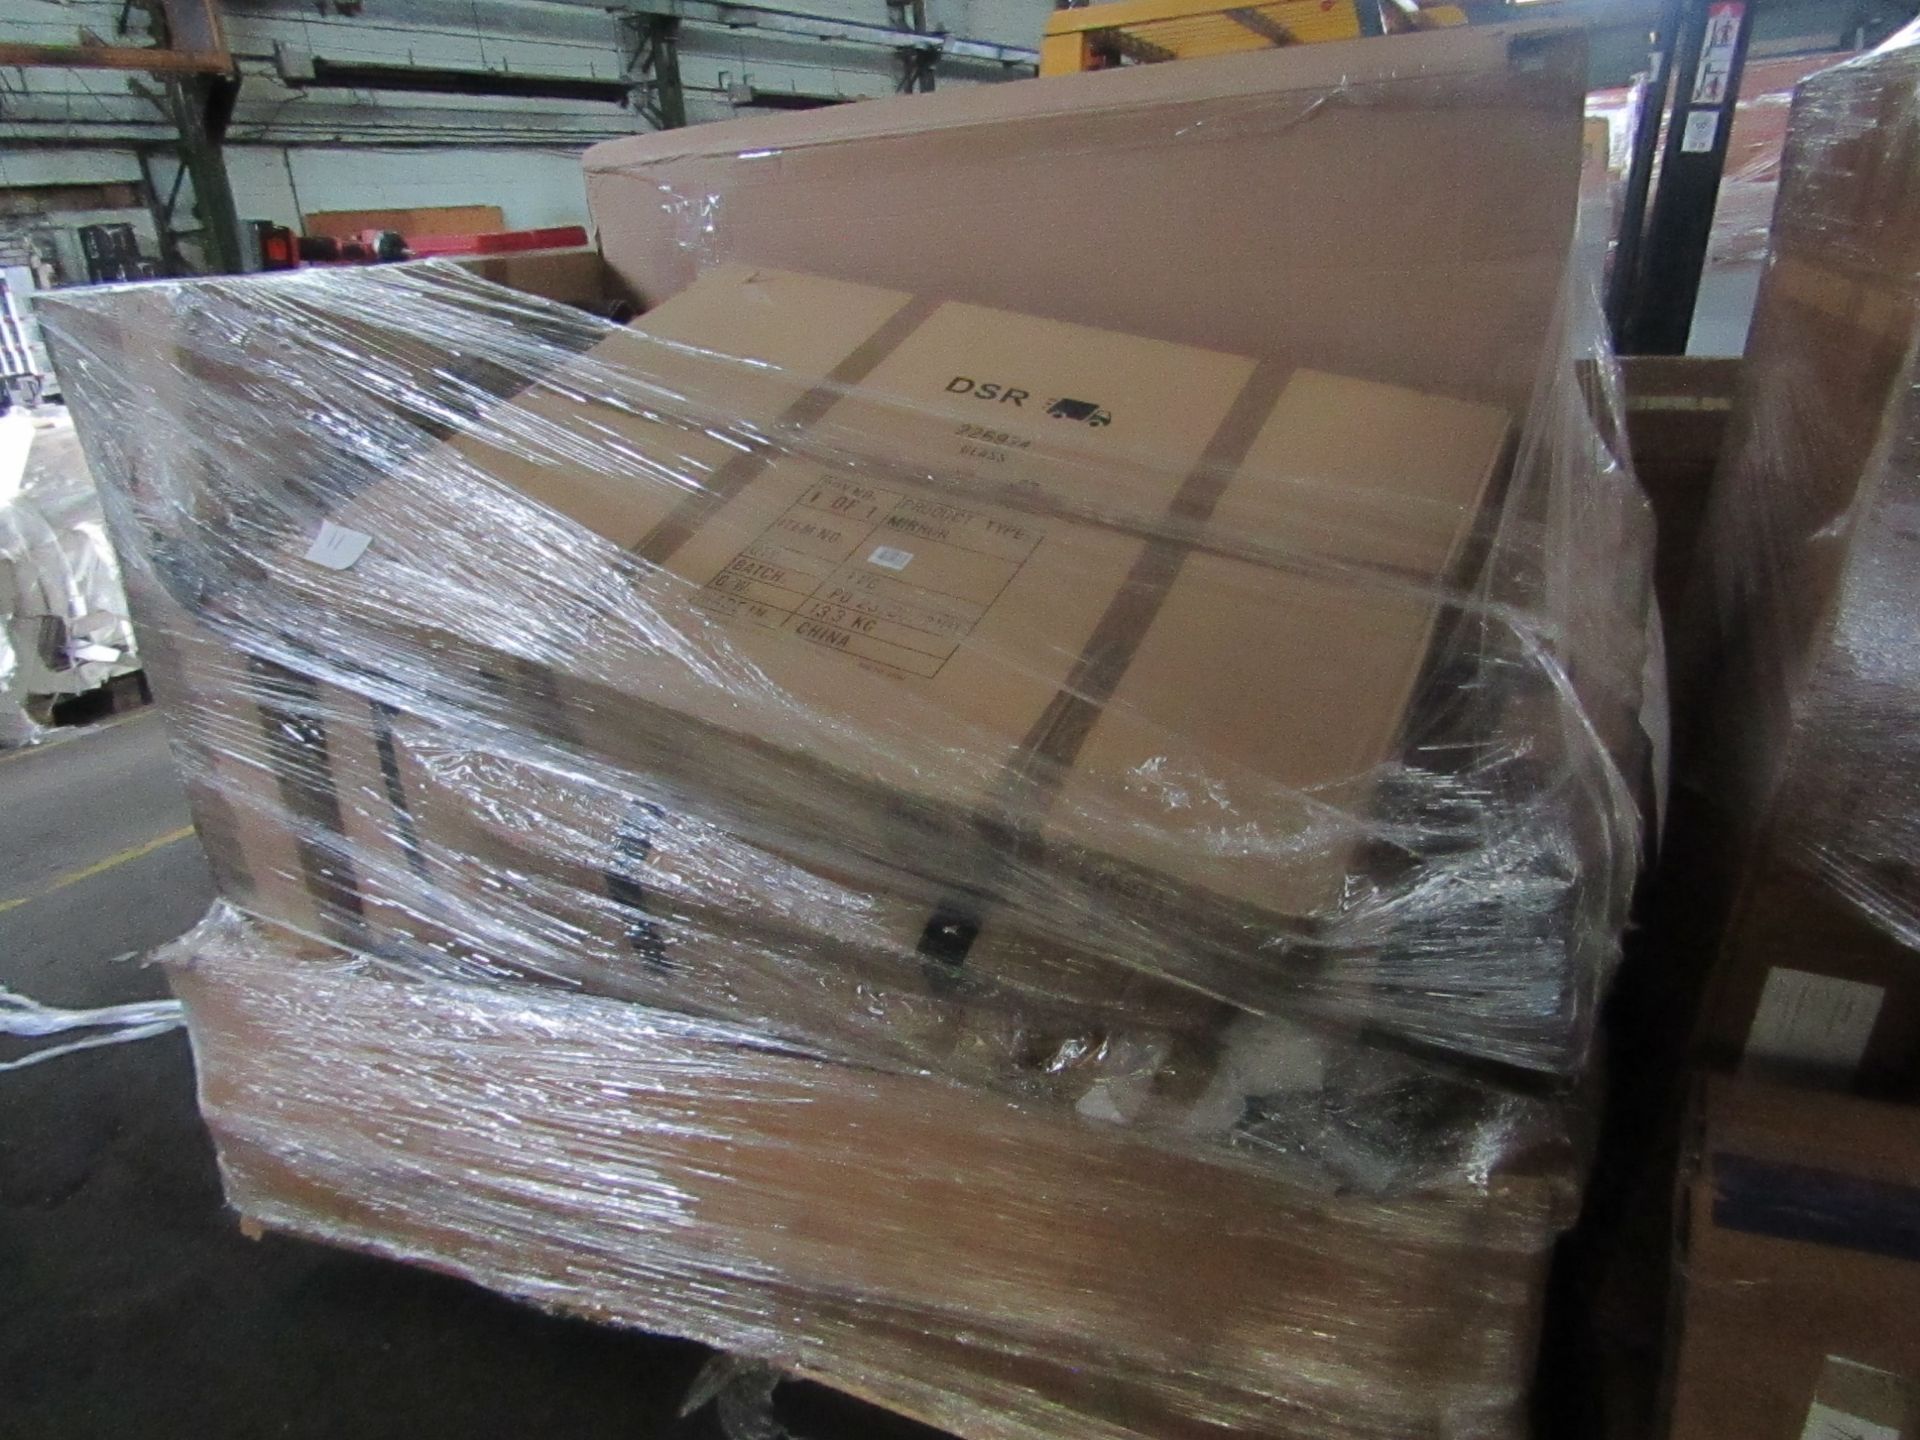 | 1X | PALLET OF FAULTY / MISSING PARTS / DAMAGED CUSTOMER RETURNS COX COX STOCK UNMANIFESTED |